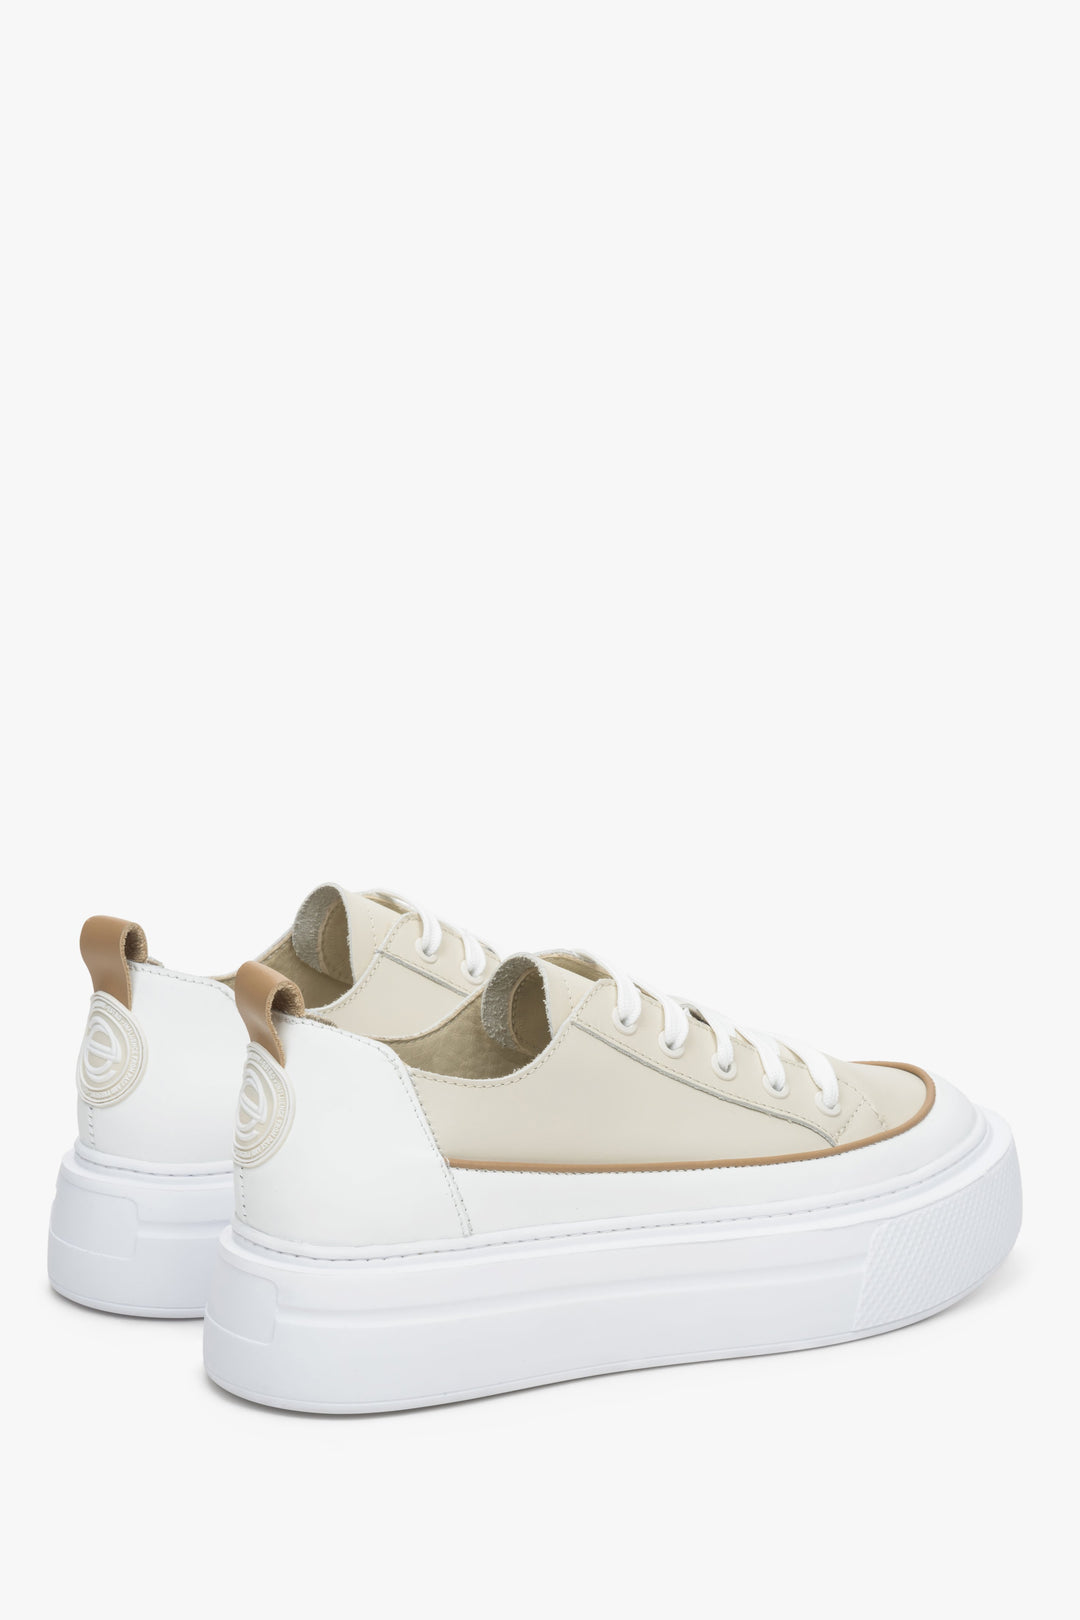 Women's low top leather sneakers Estro in beige and white - a close-up on shoeline/